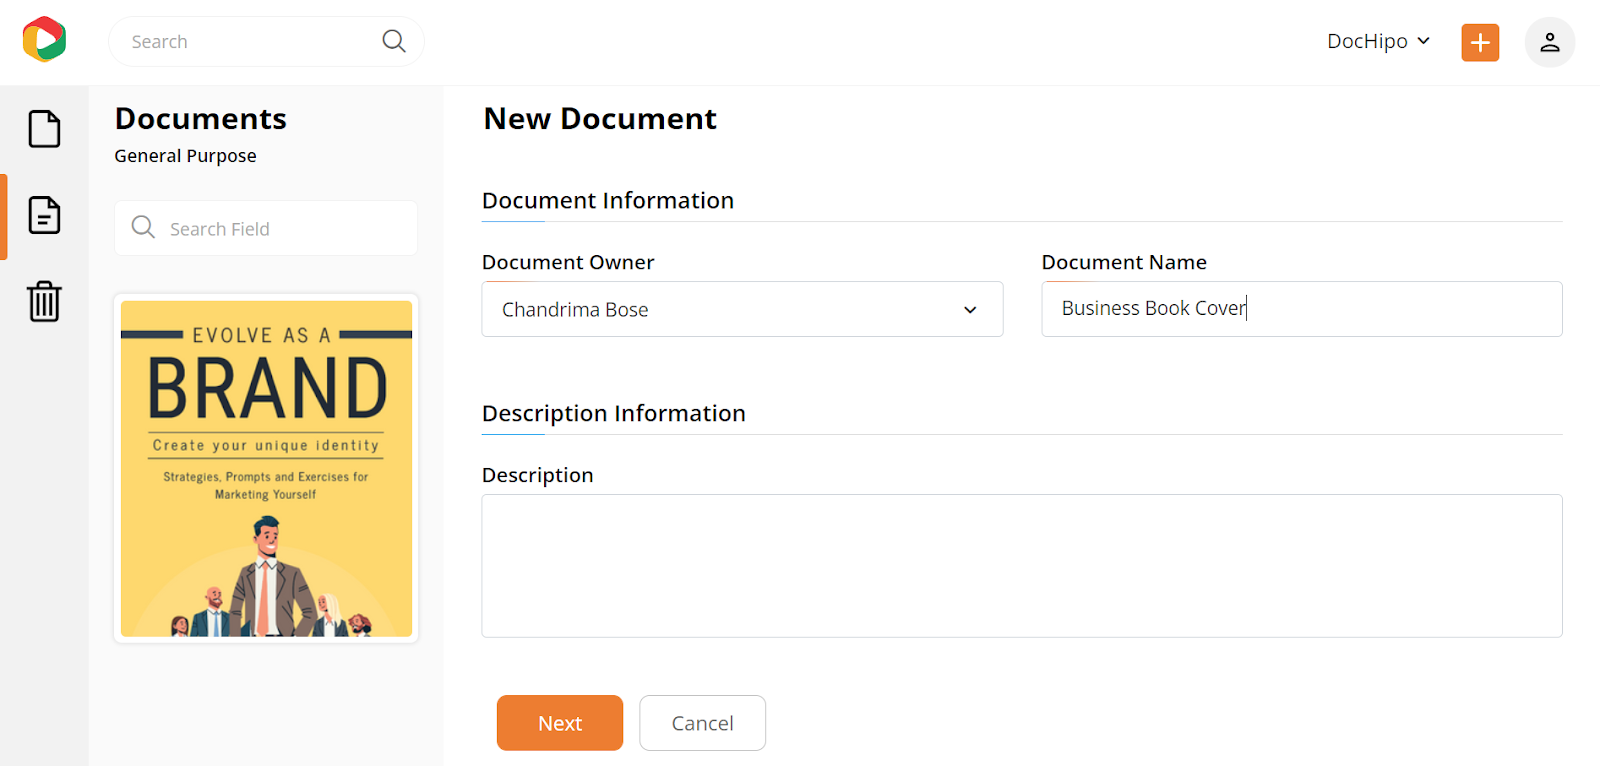 Add a Document Name and Description